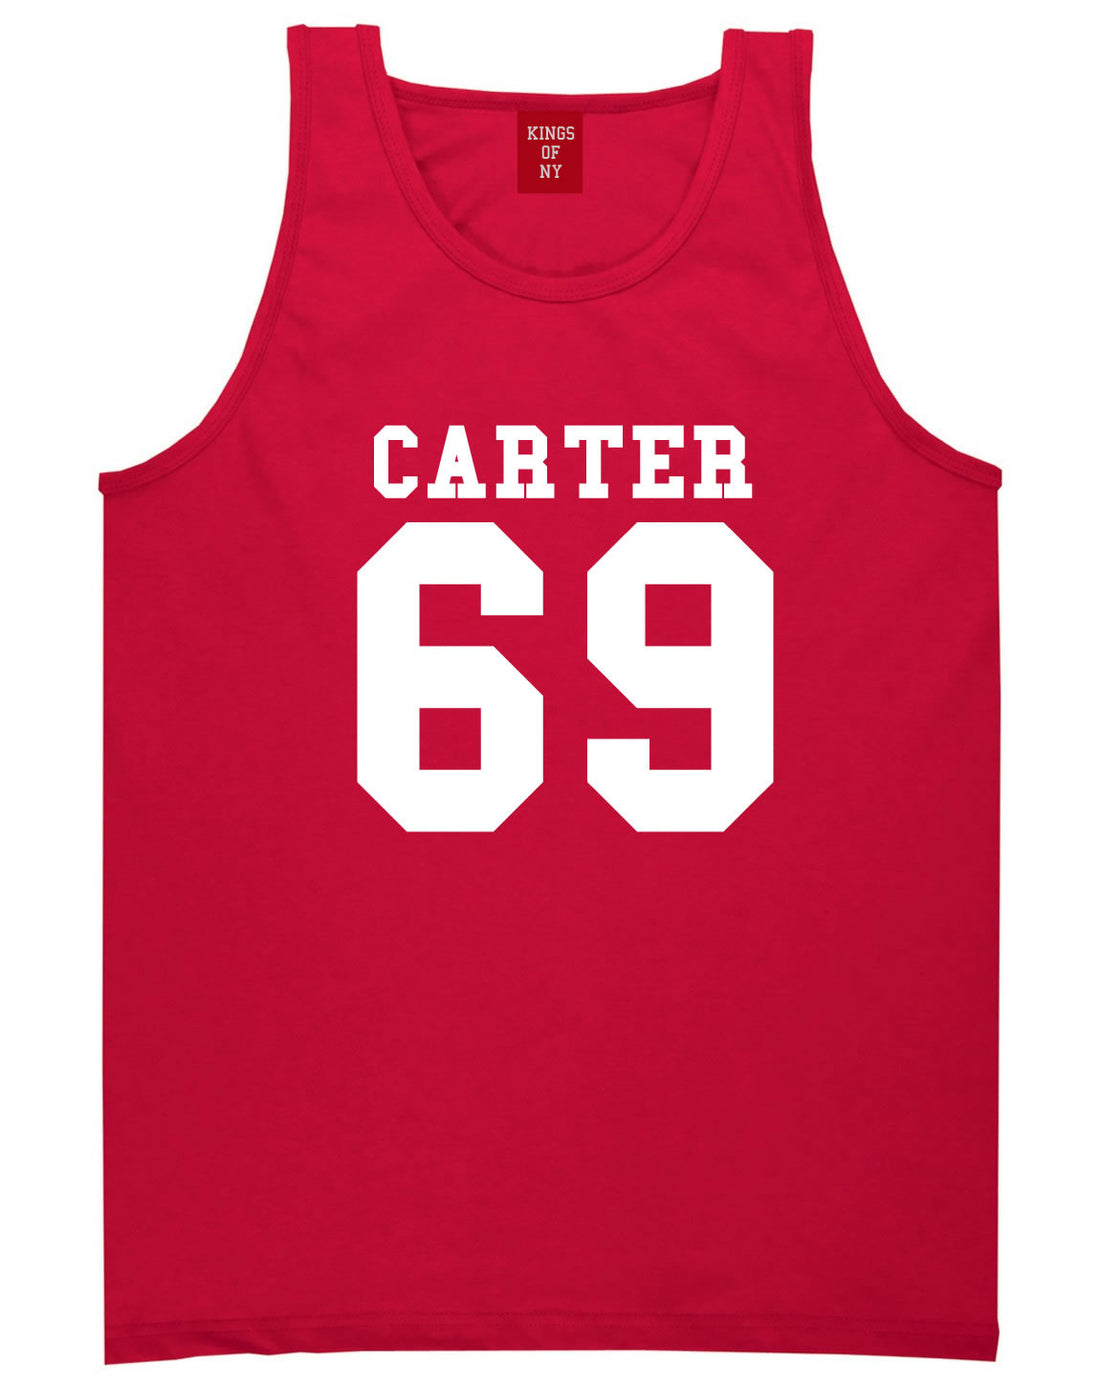  Carter 69 Team Tank Top in Red by Kings Of NY